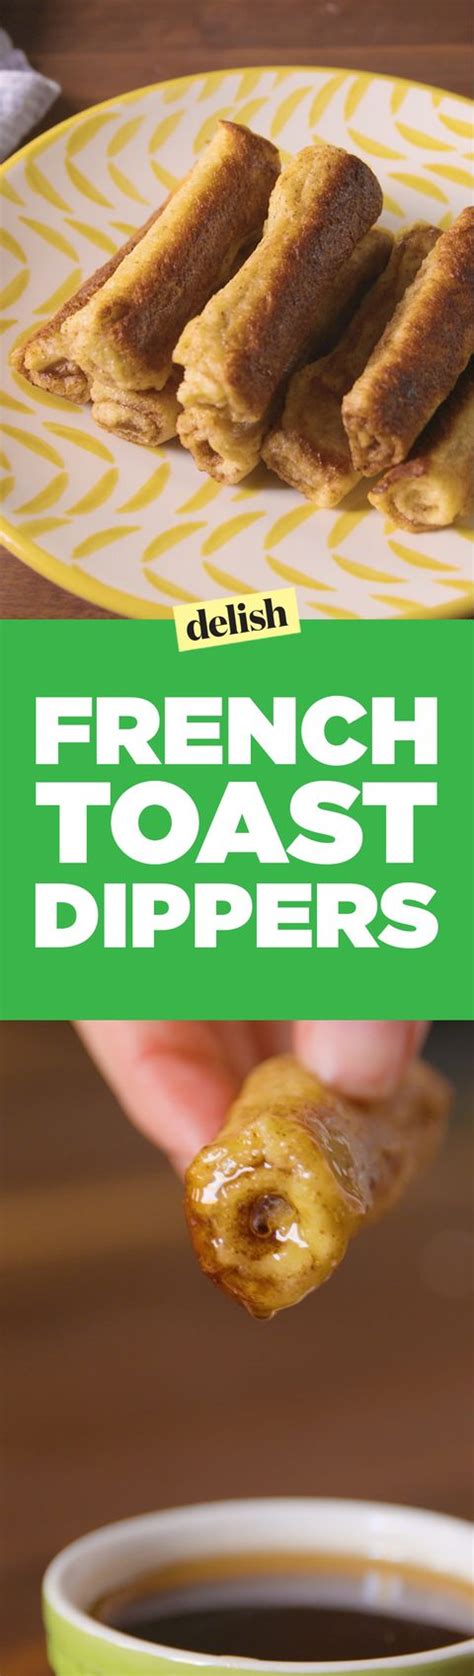 Cooking French Toast Dippers Video How To Video French Toast Dippers